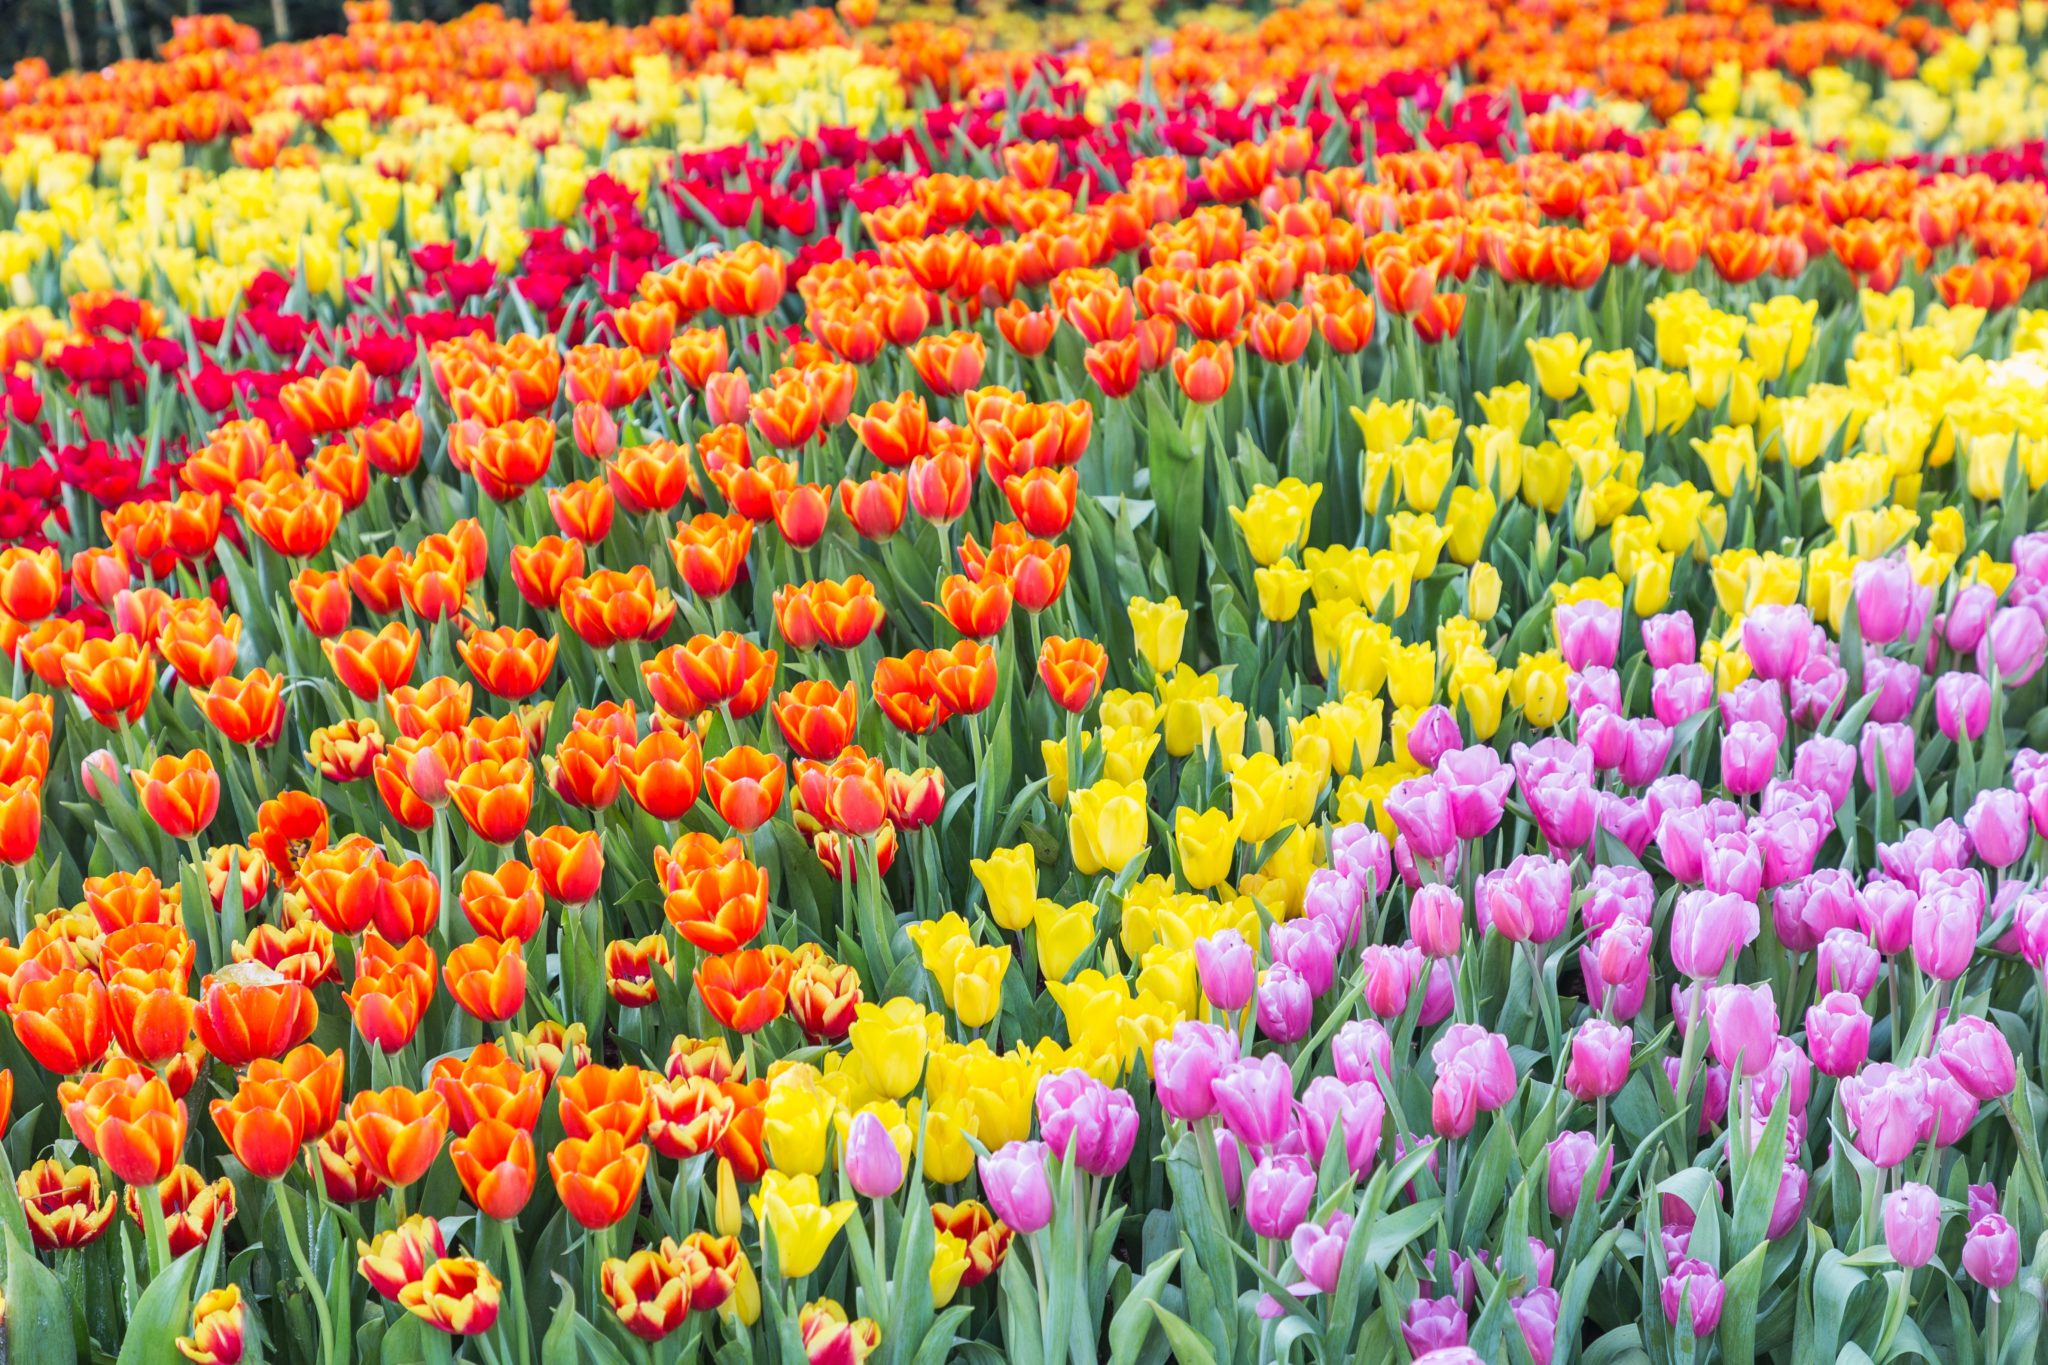 TULIPS AND TRAFFIC | The New WARM 106.9